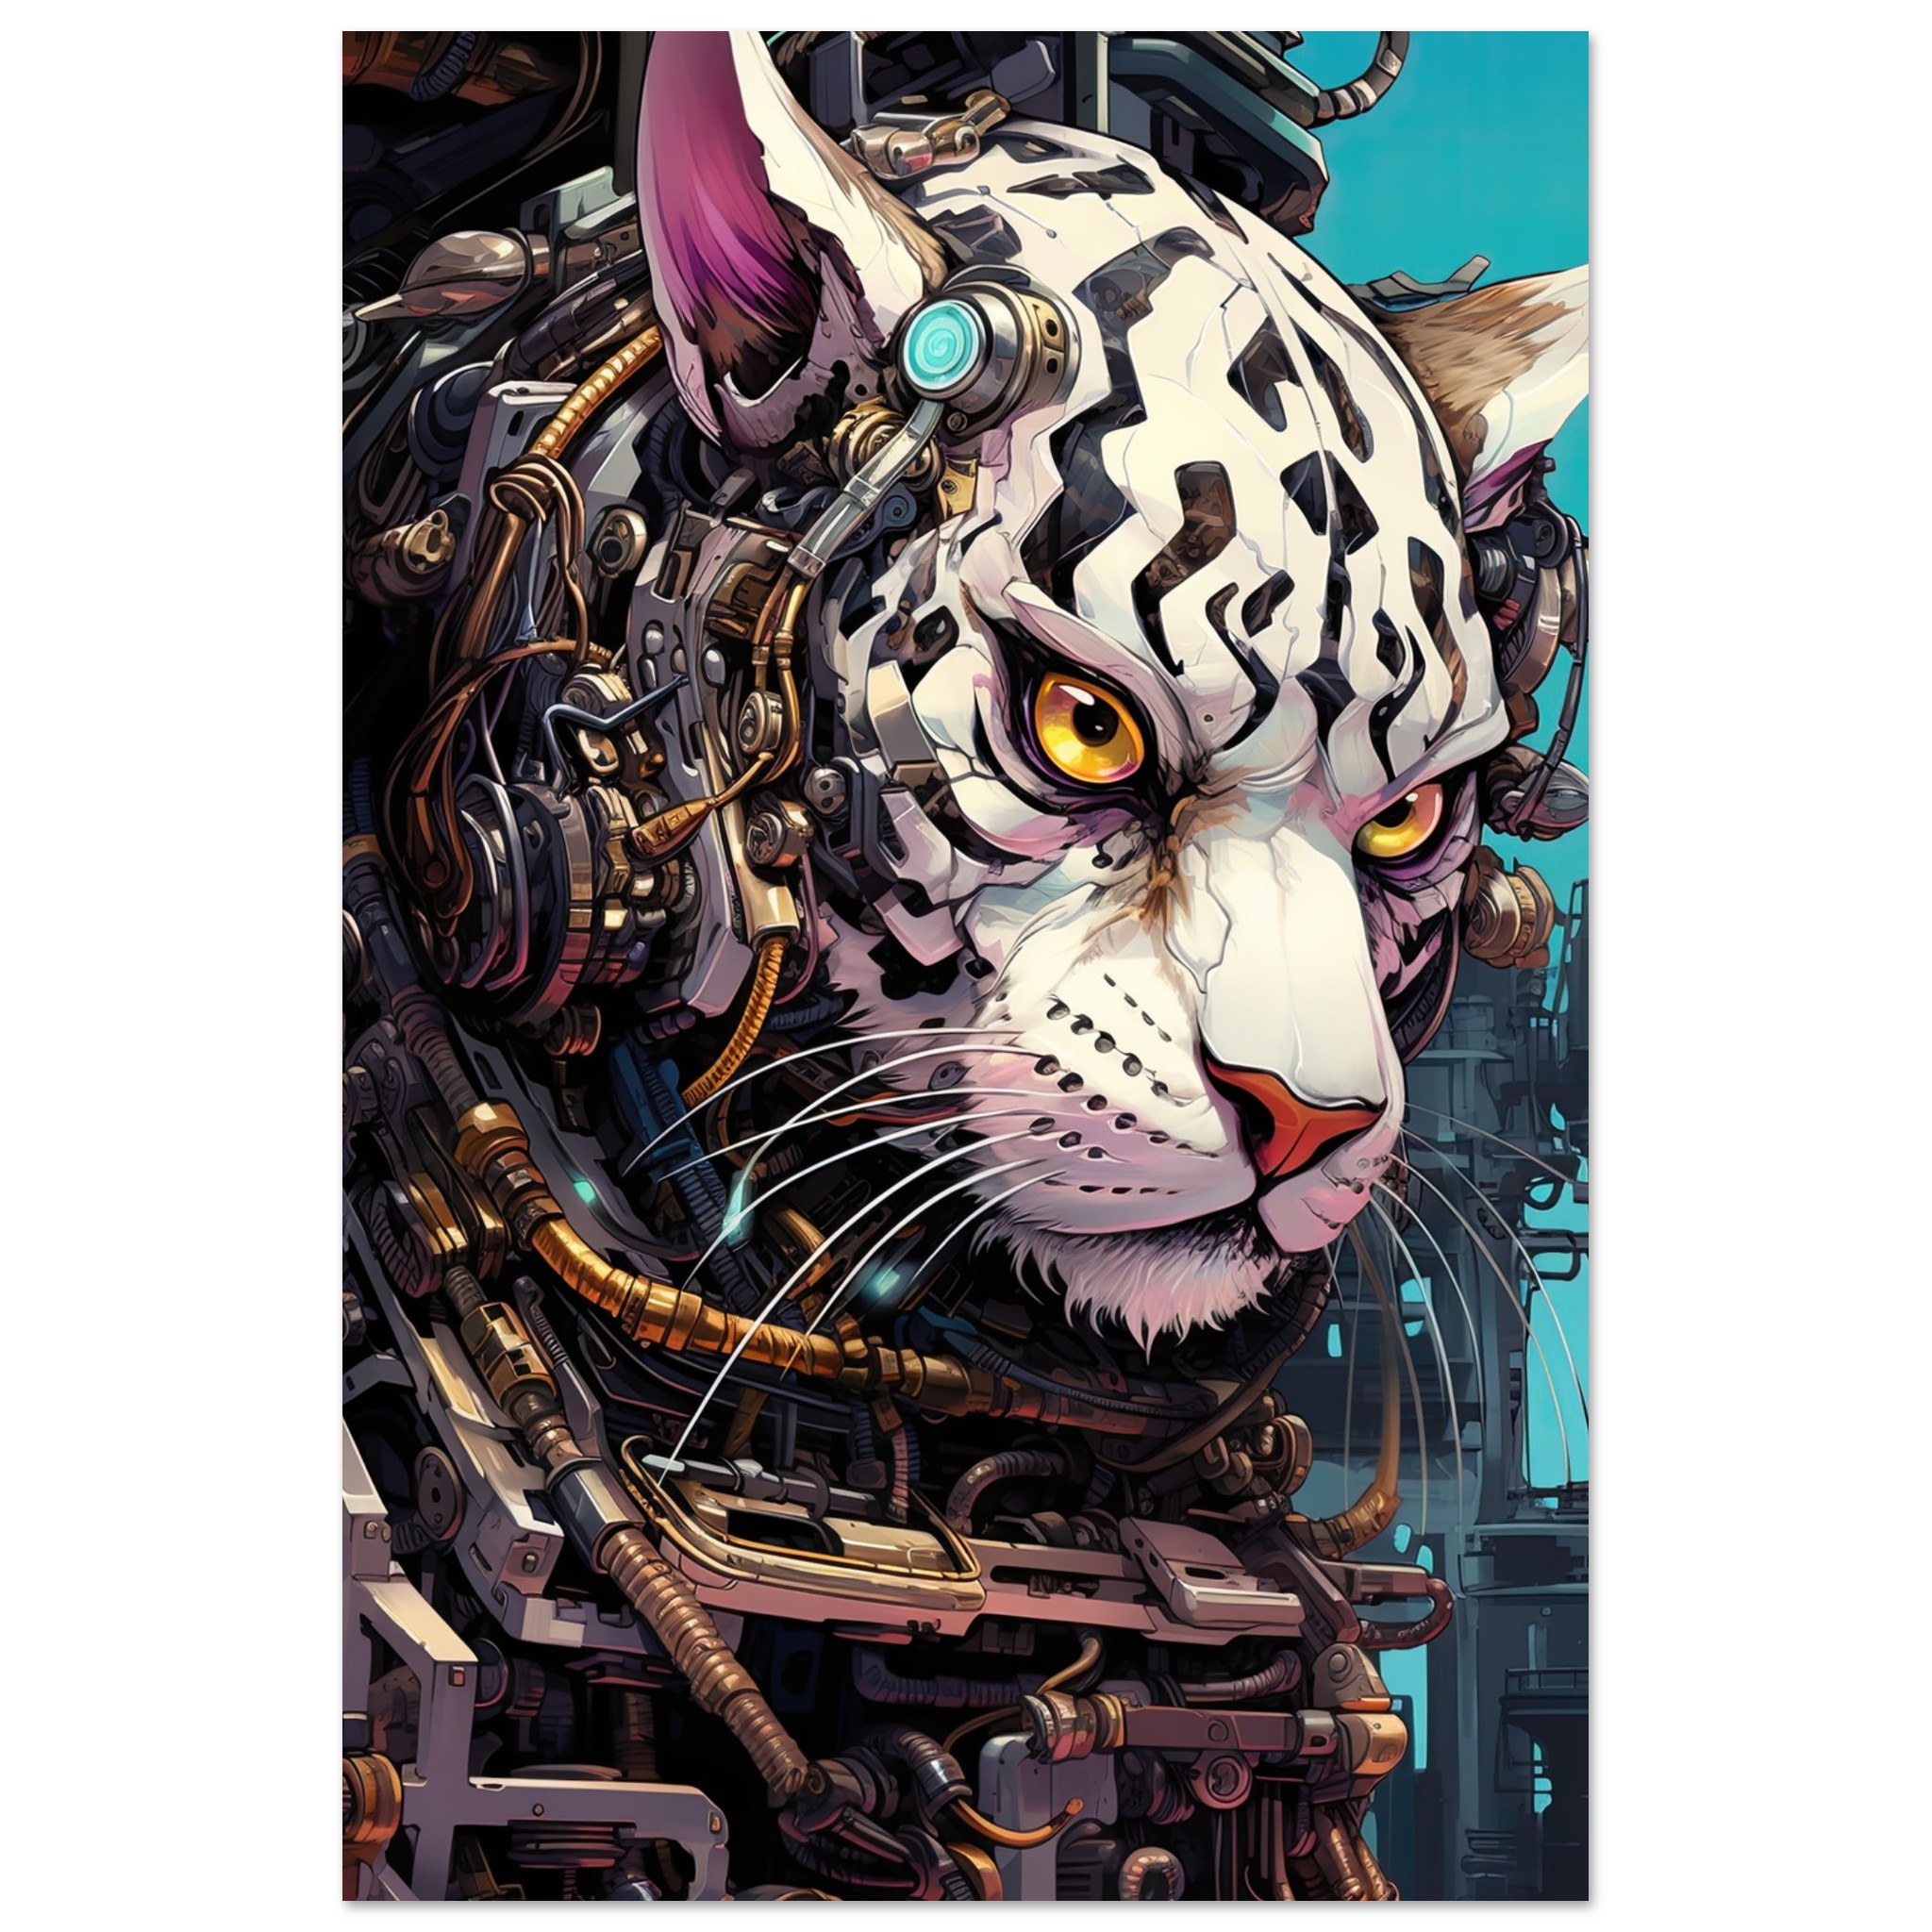 Cybernetic White Tiger Poster – 60×90 cm / 24×36″